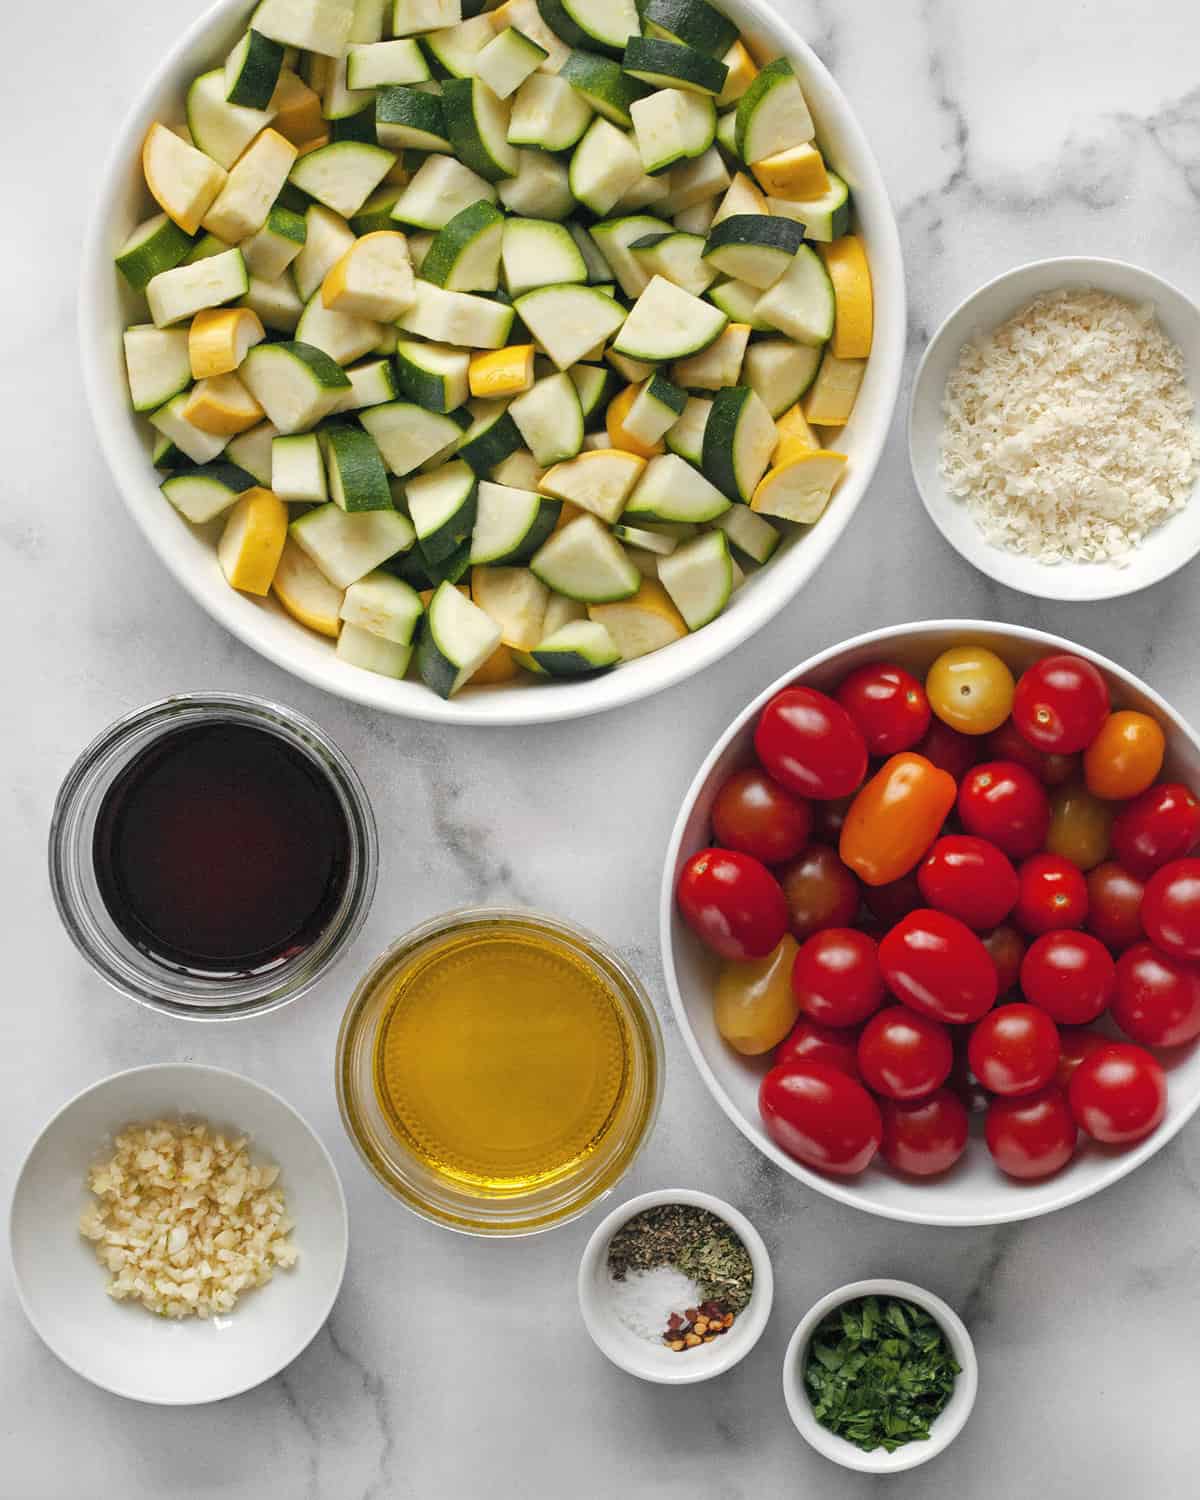 Ingredients including zucchini, squash, tomatoes, balsamic vinegar, olive oil, garlic, spices and parmesan.